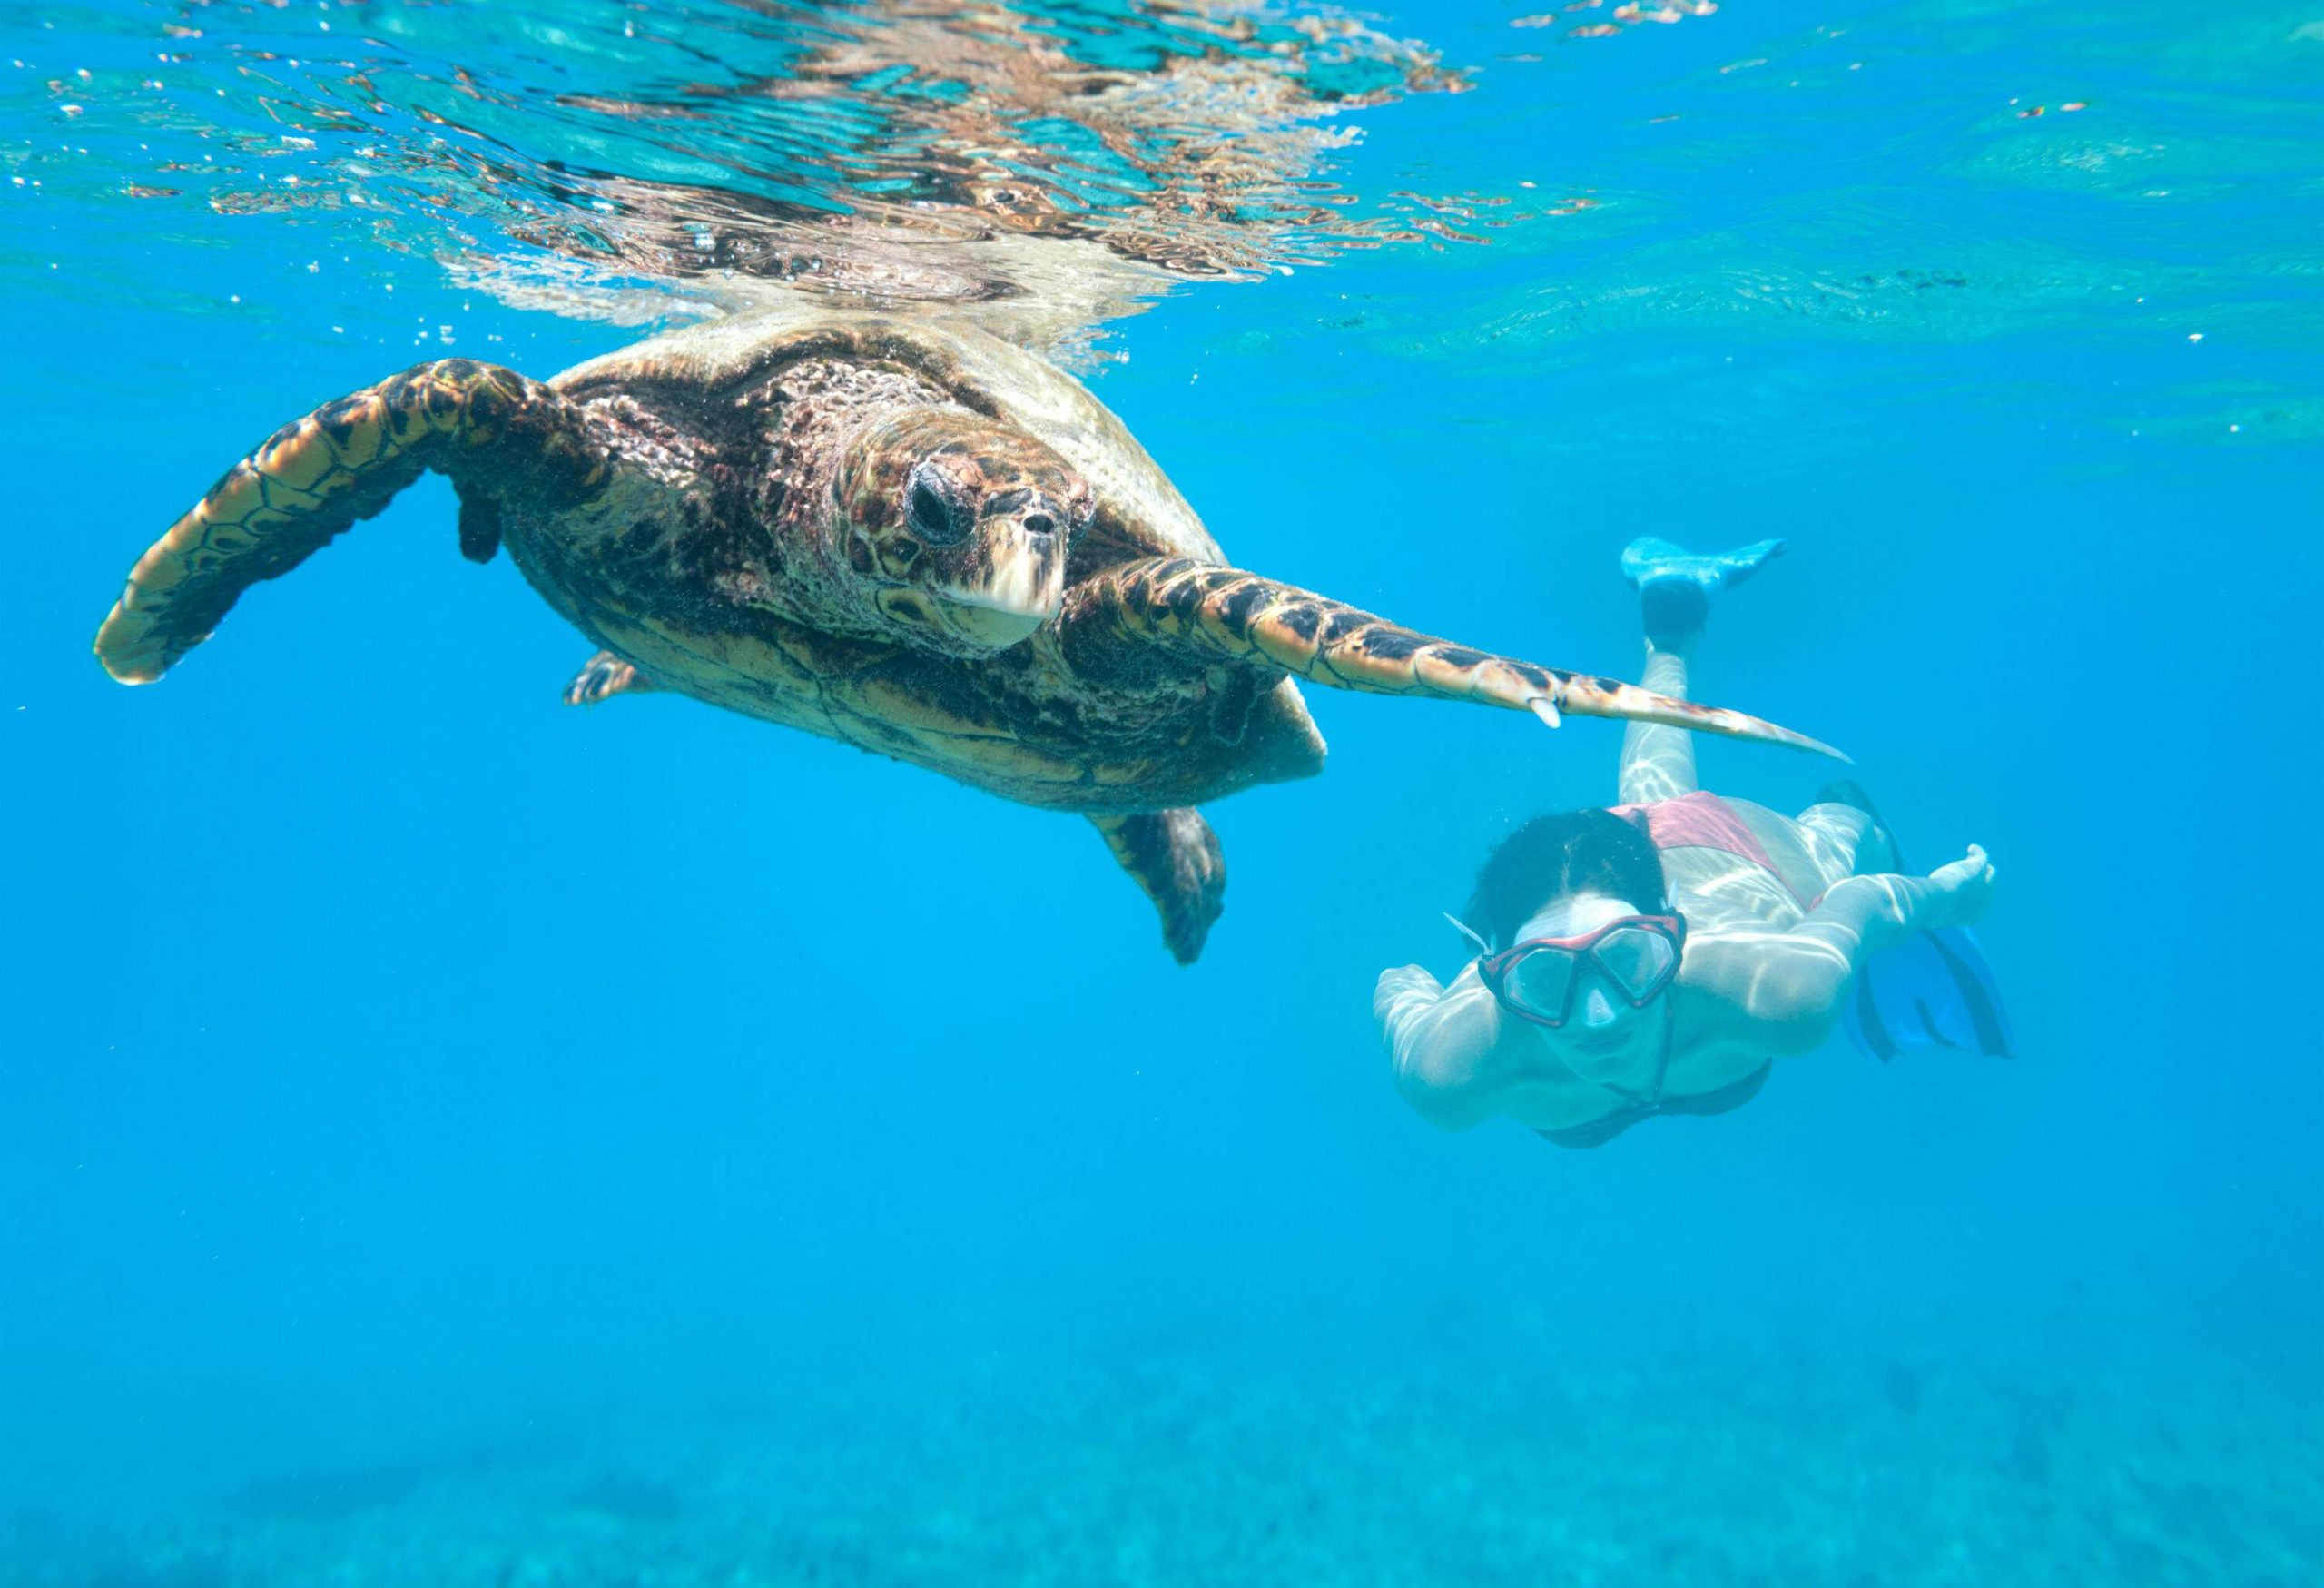 A woman swimming with a sea turtle.